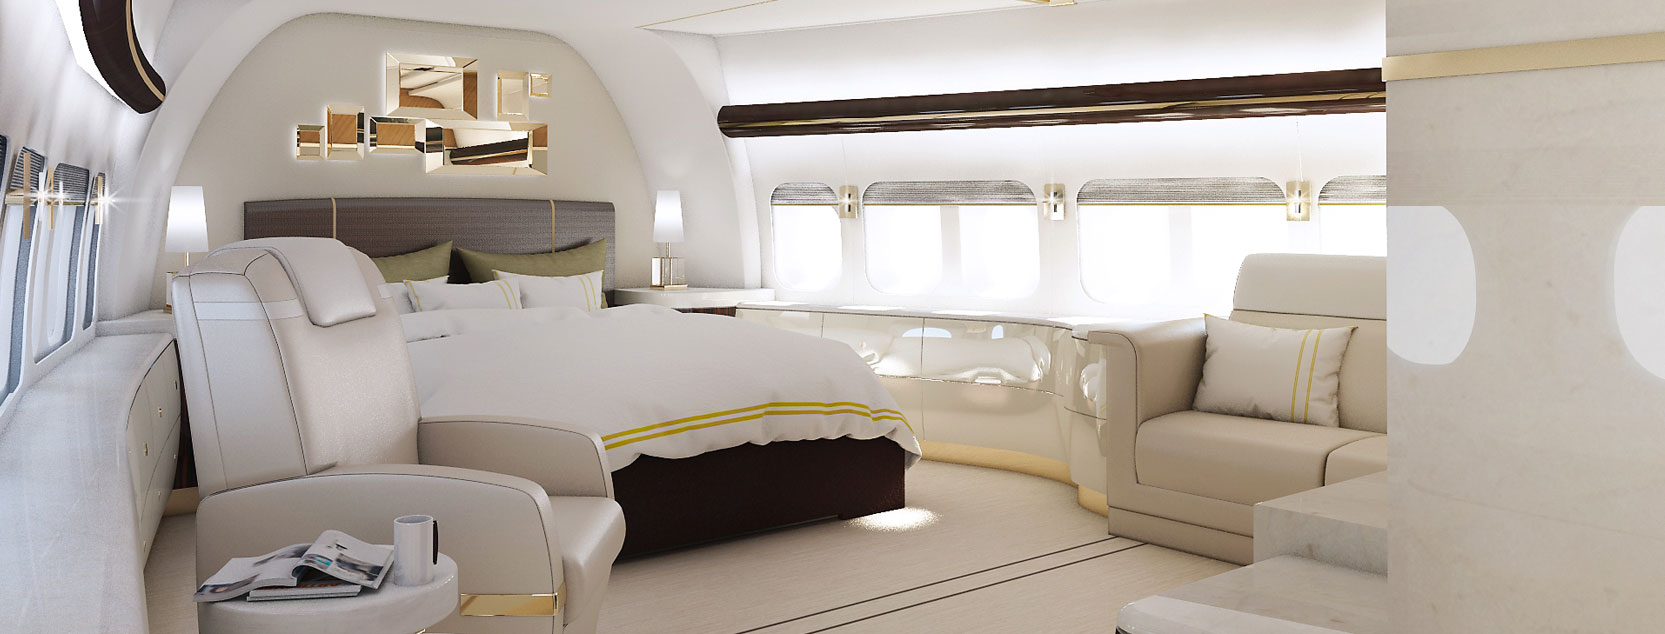 The World S First Private Boeing 747 Interior Looks Like A